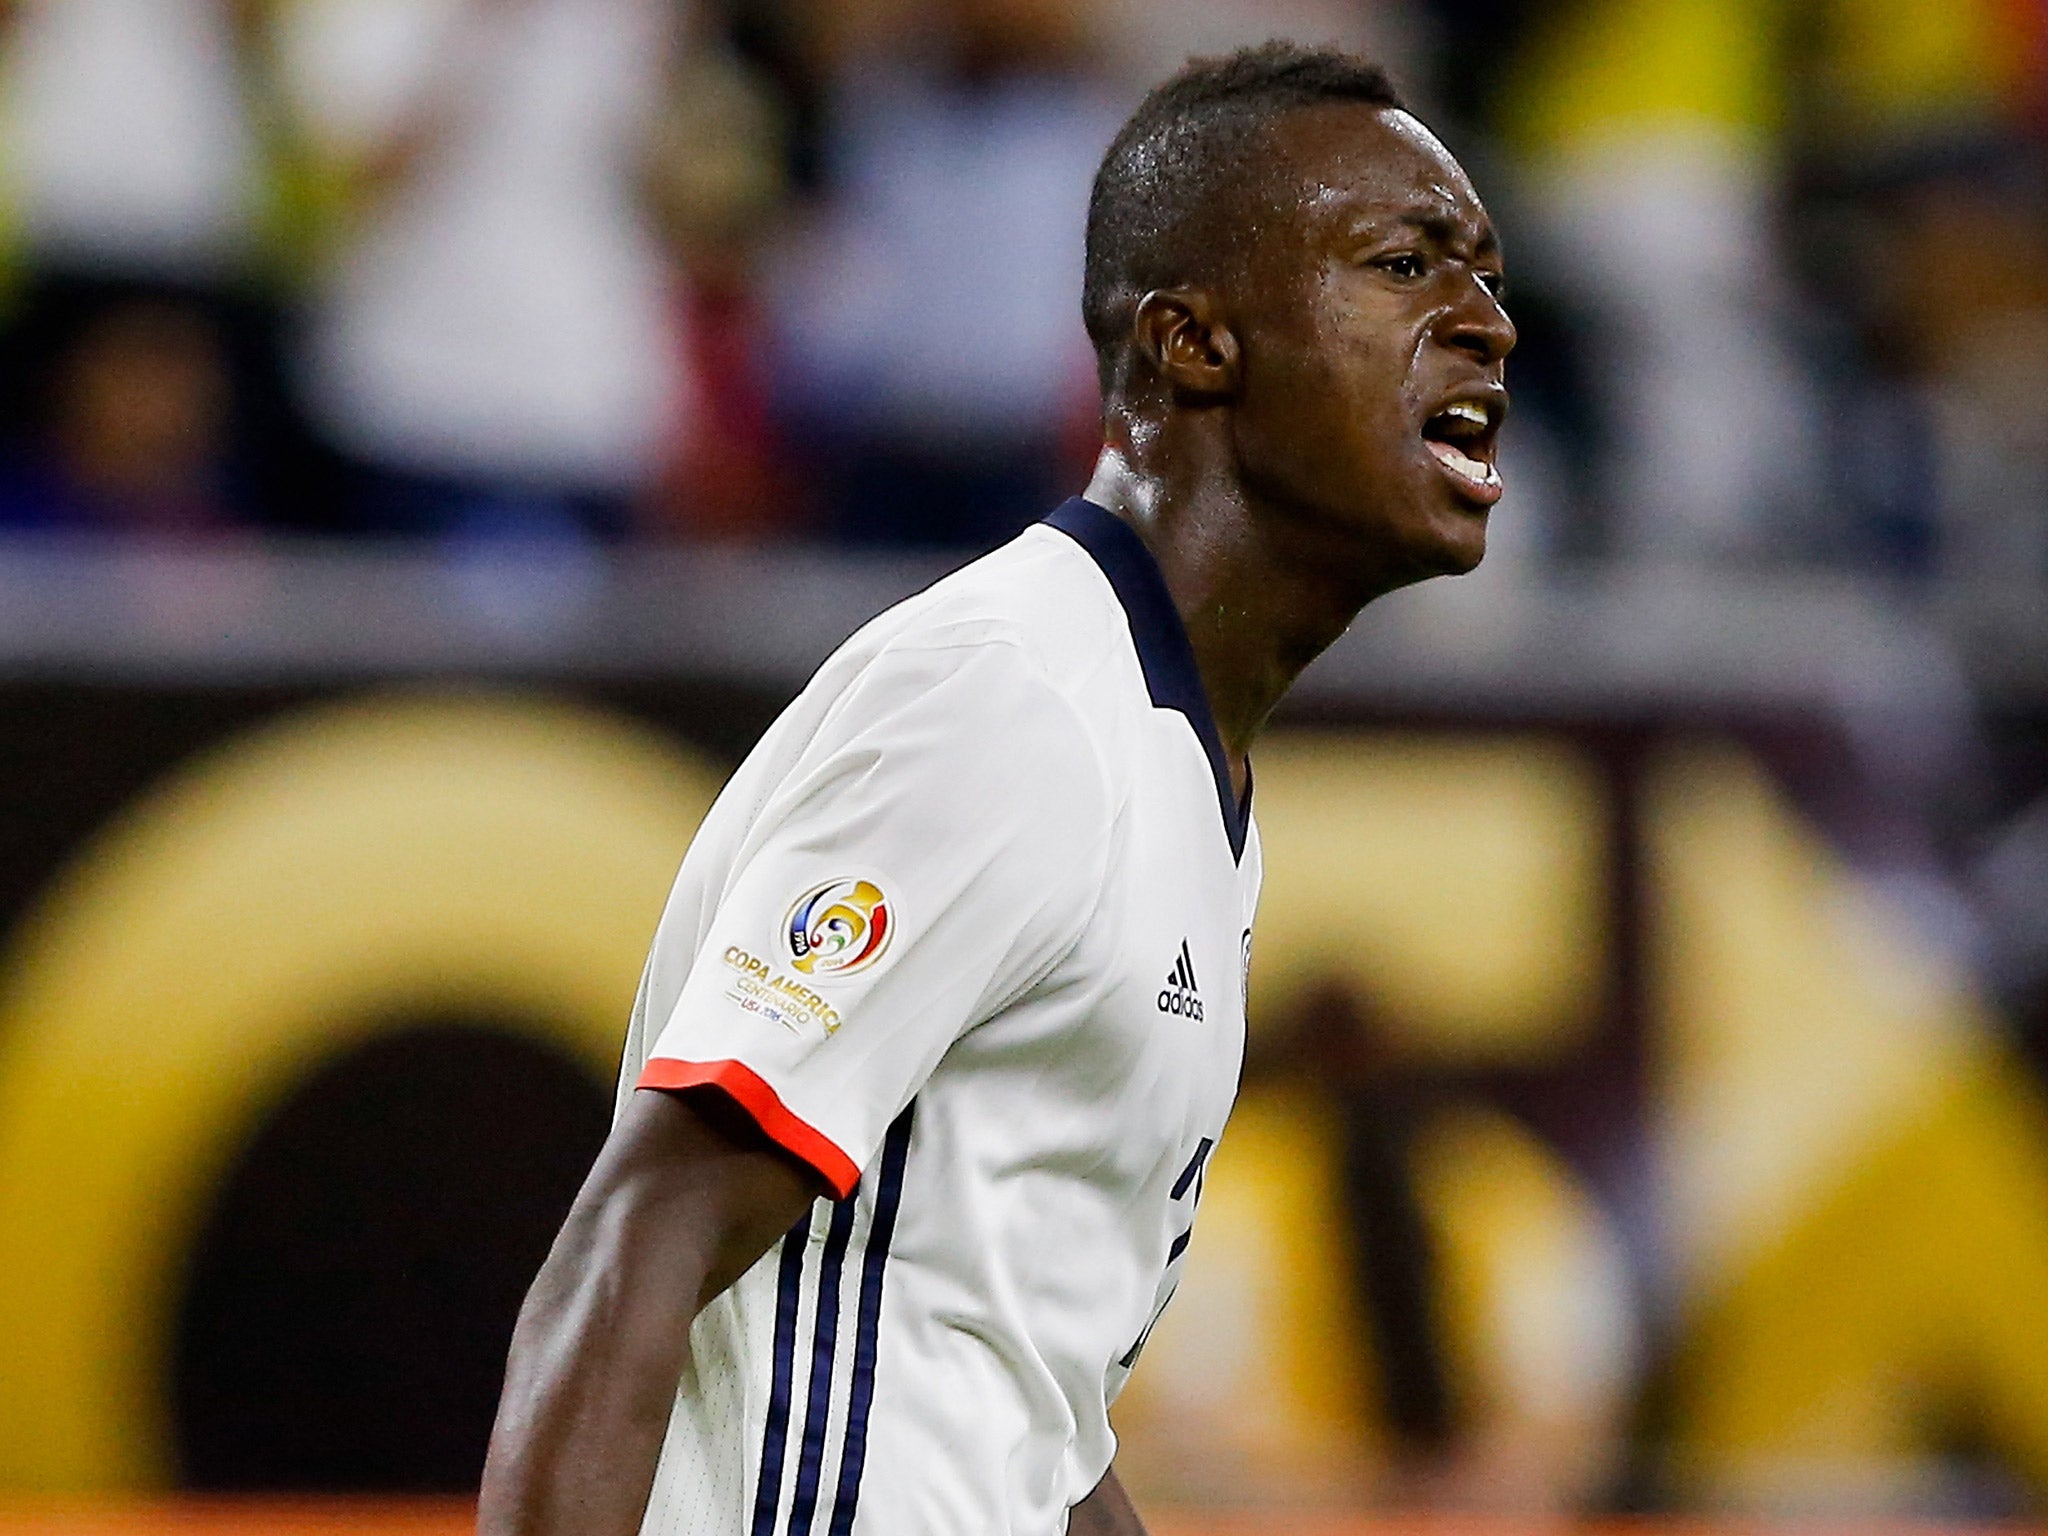 Marlos Moreno has joined Manchester City and immediately joined Deportivo La Coruna on loan